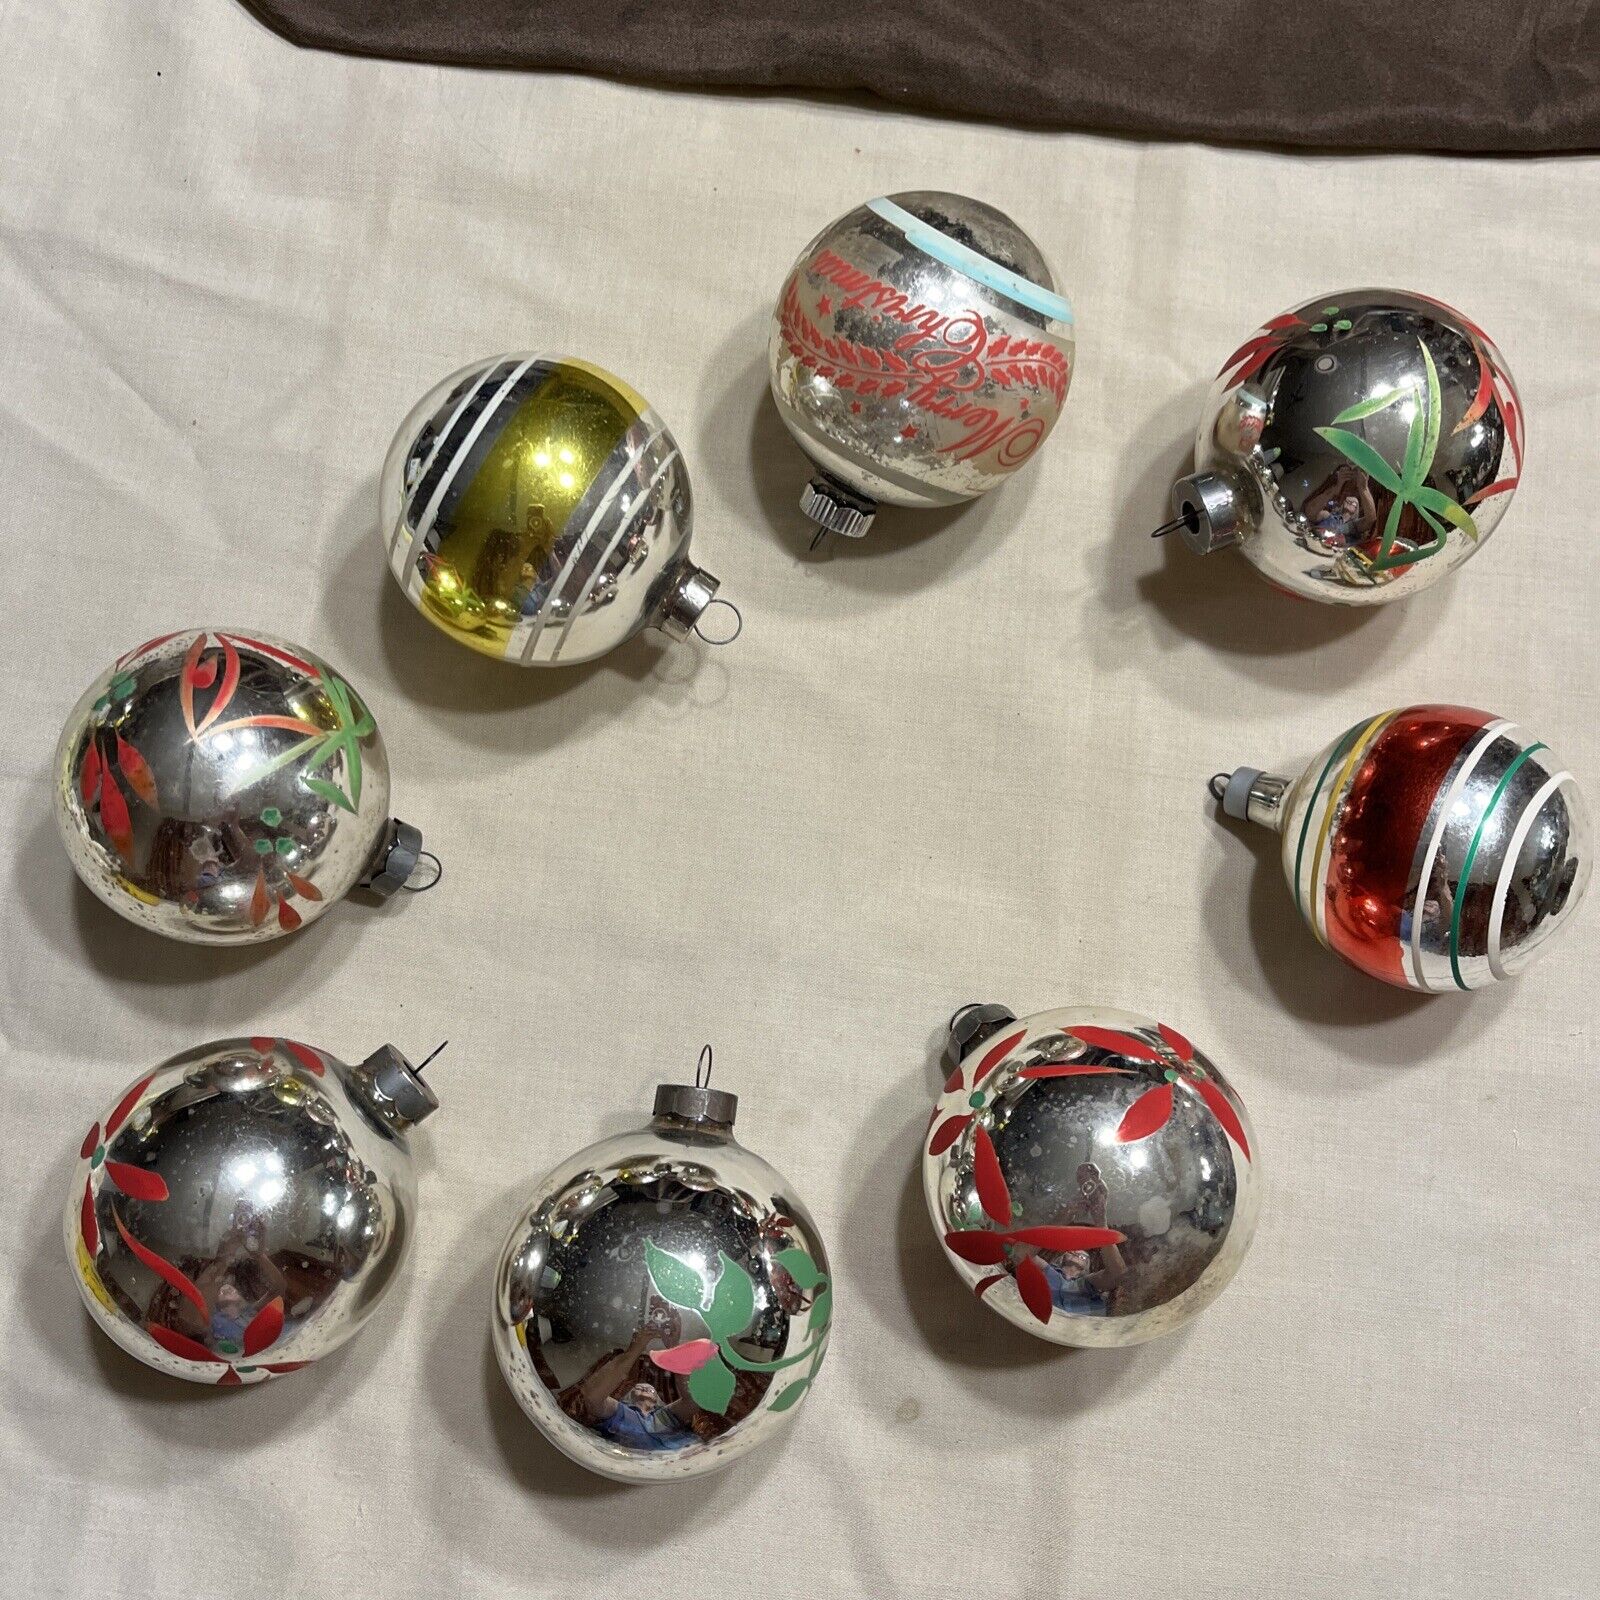 Lot of 8 Vintage Silver Glass Ball Ornaments 2 1/2” Hand Painted Stripes/ Floral